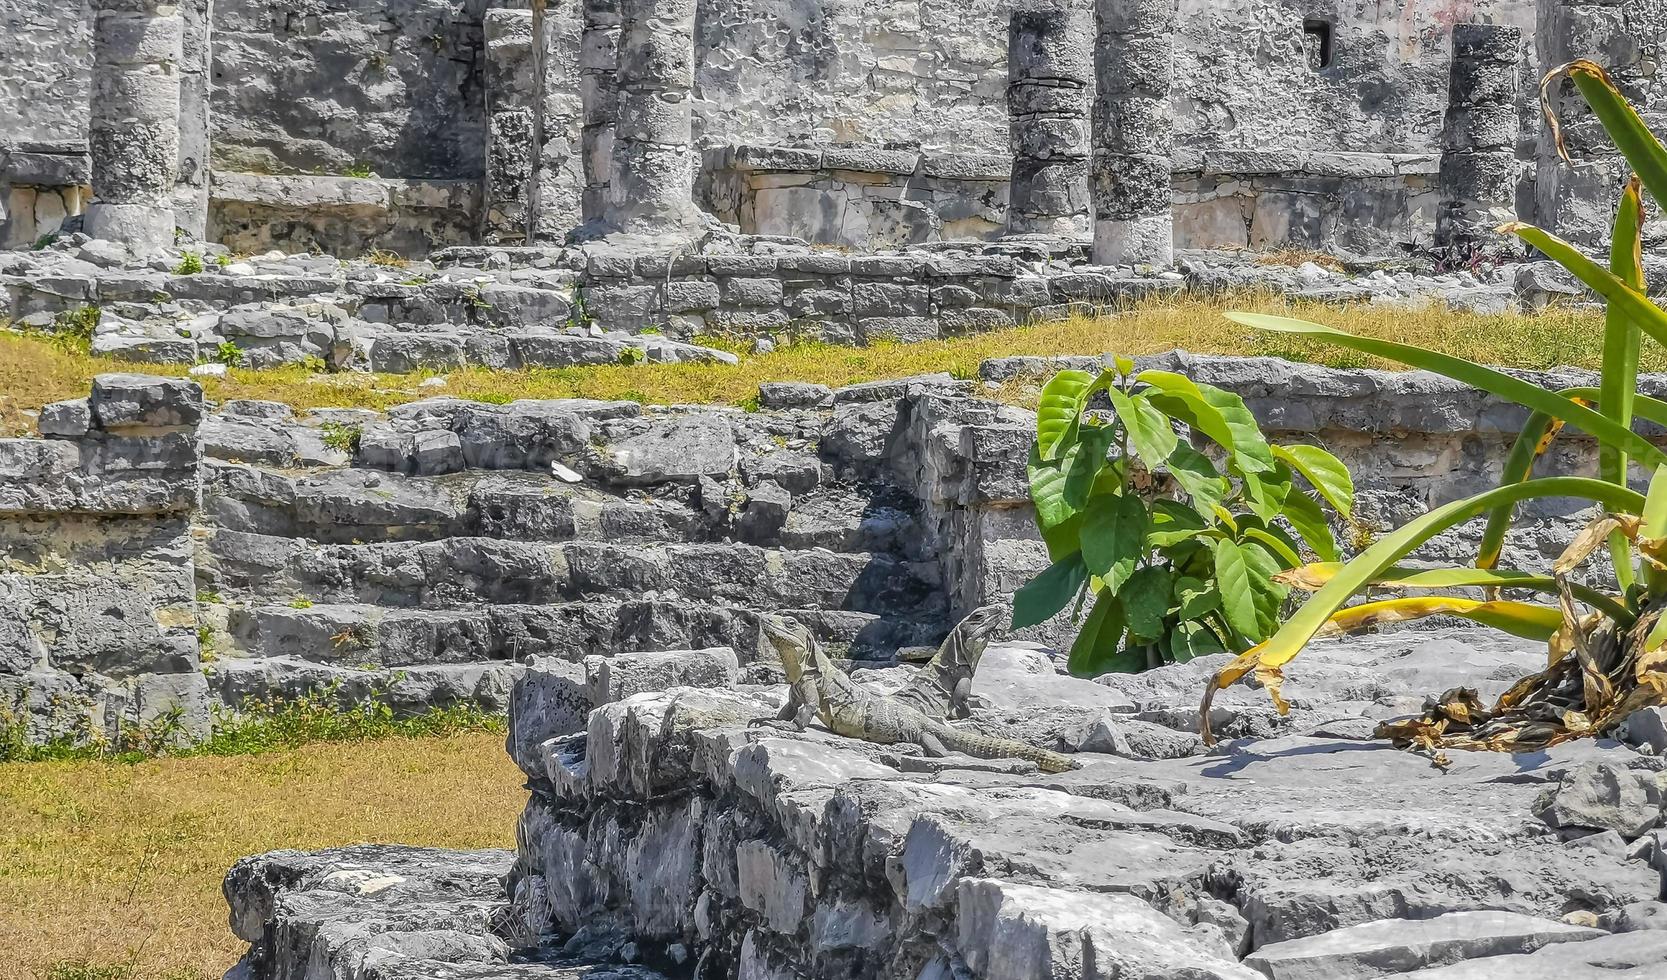 Ancient Tulum ruins Mayan site temple pyramids artifacts seascape Mexico. photo